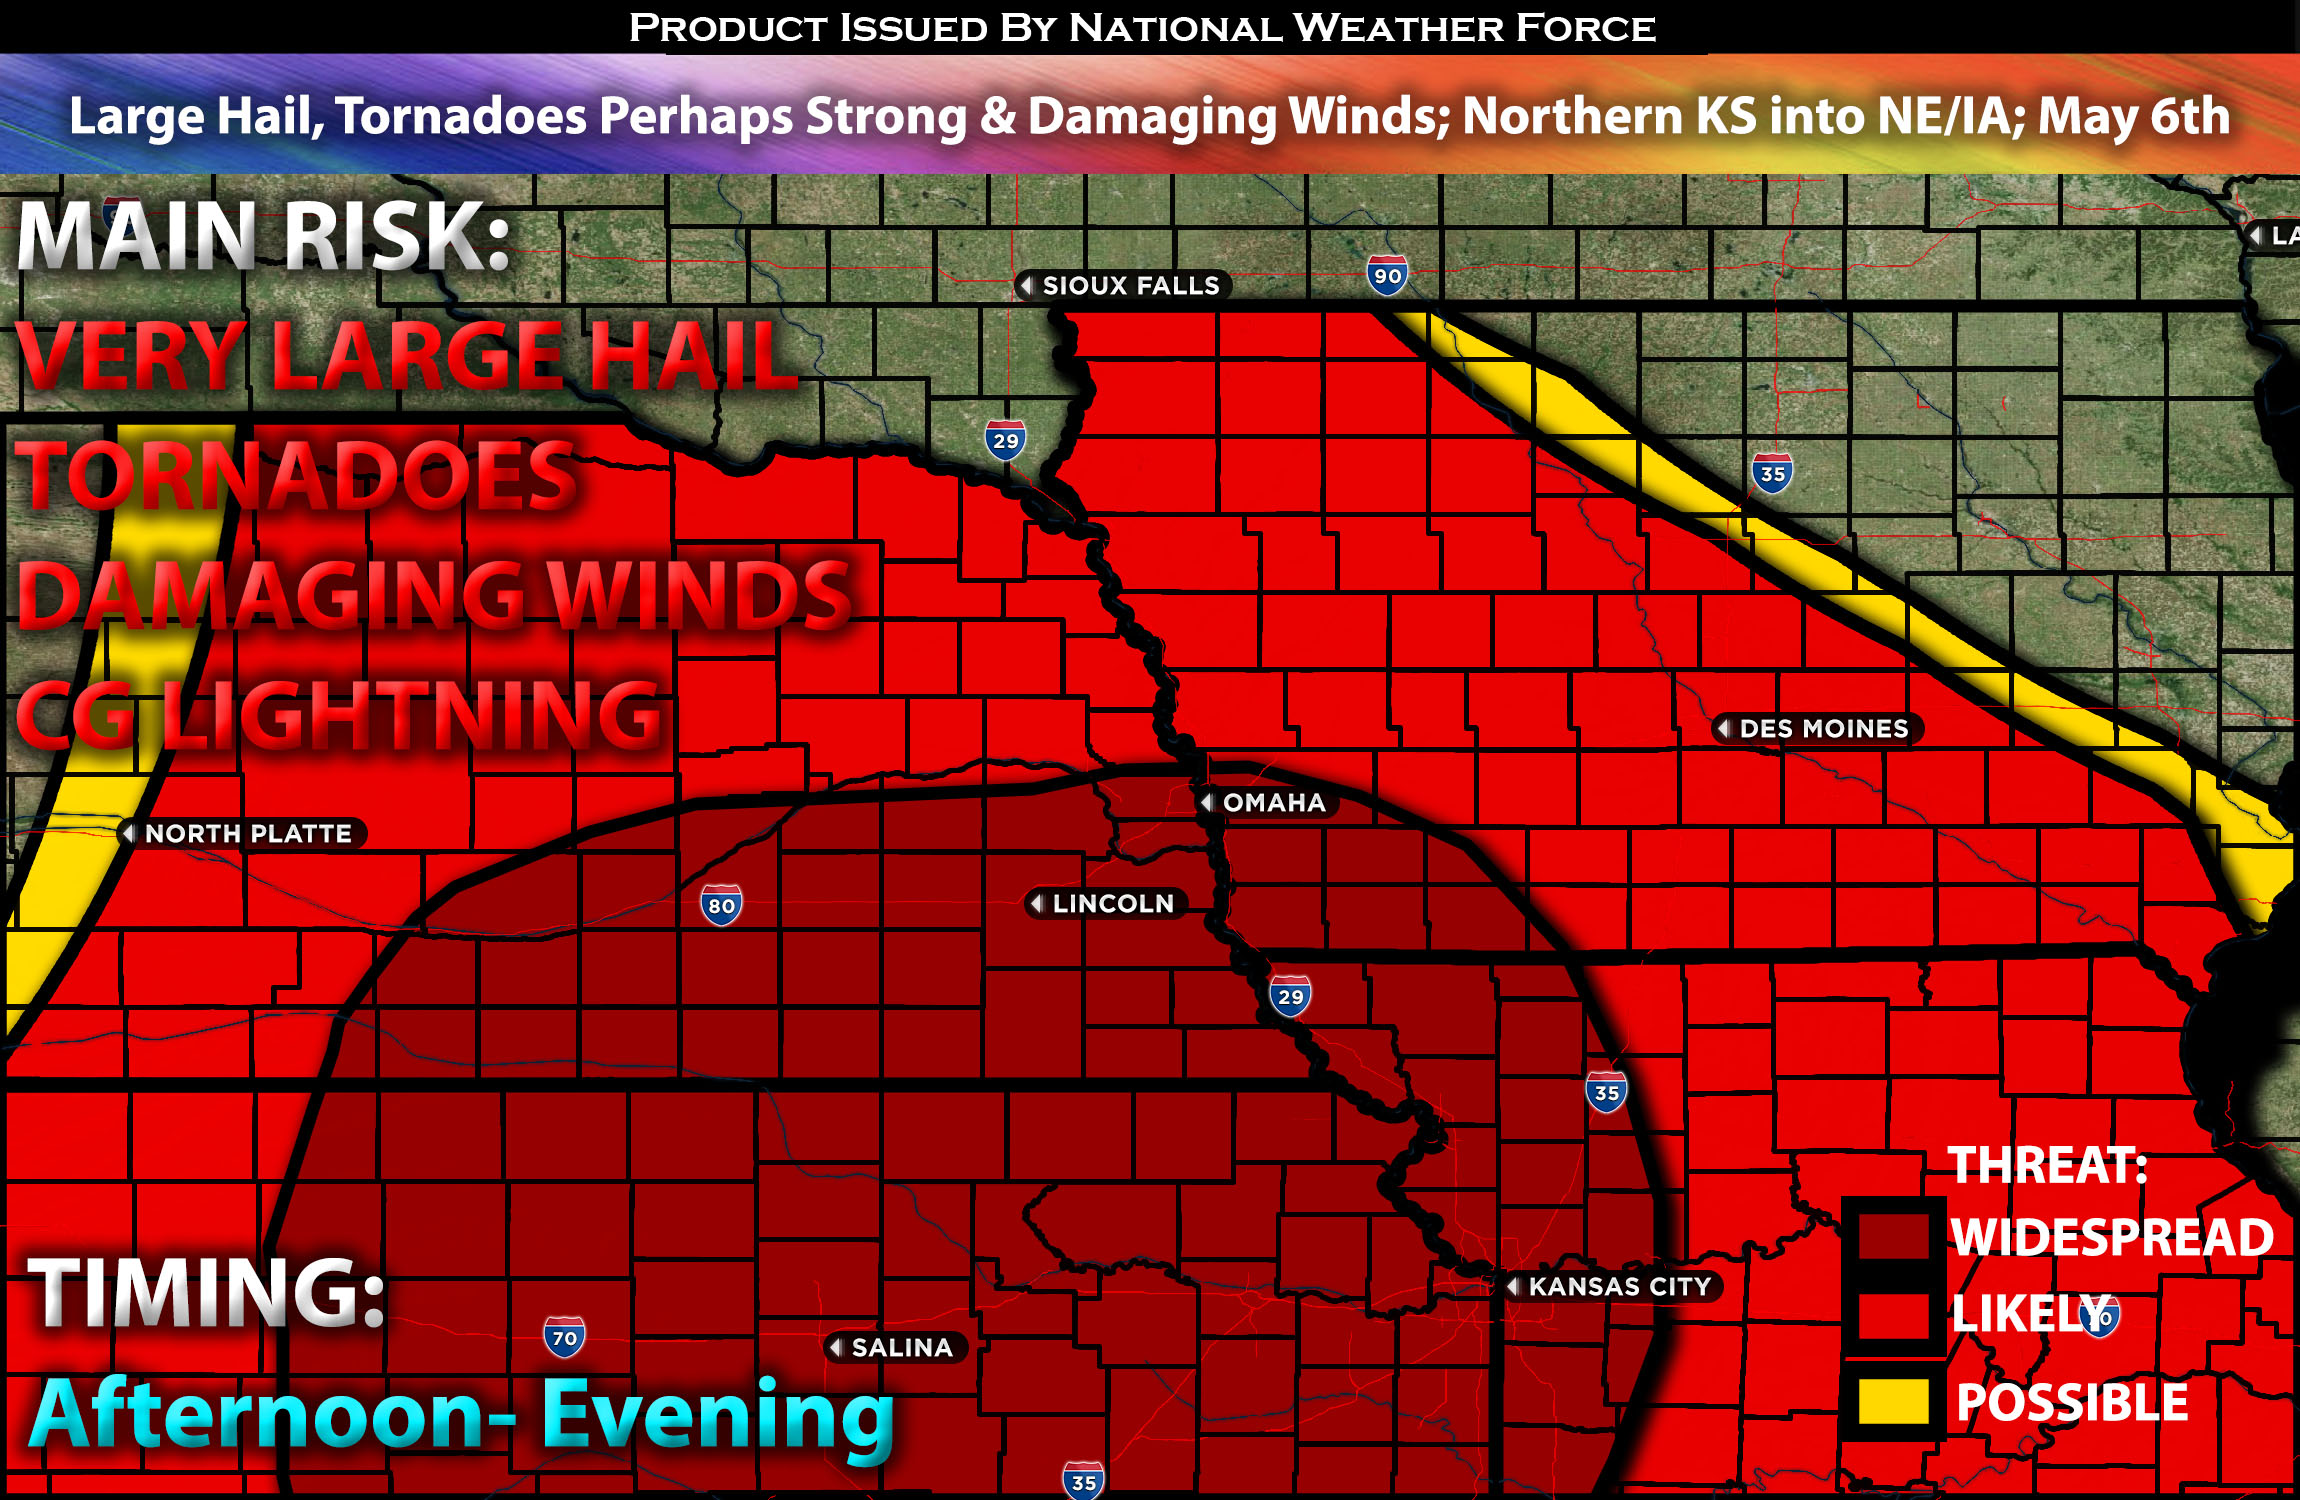 Large Hail, Tornadoes Perhaps Strong & Damaging Winds Likely; Across Northern KS into NE/IA/MO; May 6th